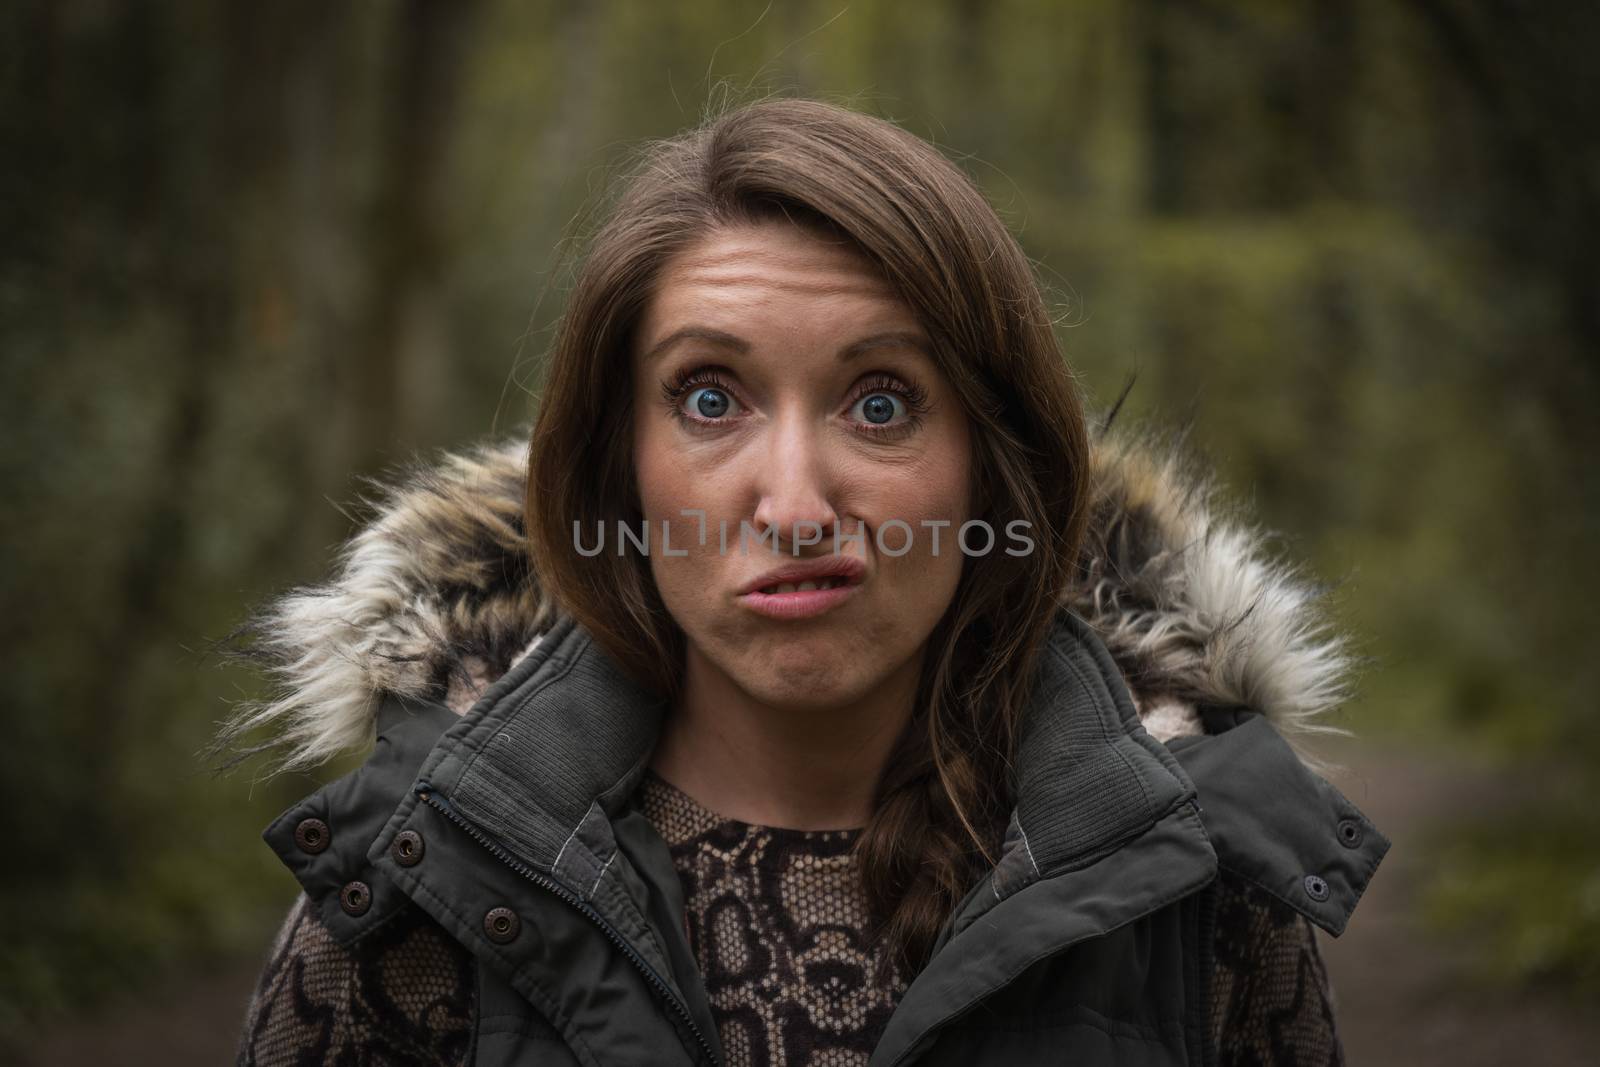 A young attractive woman pulling a silly face close up in the countryside